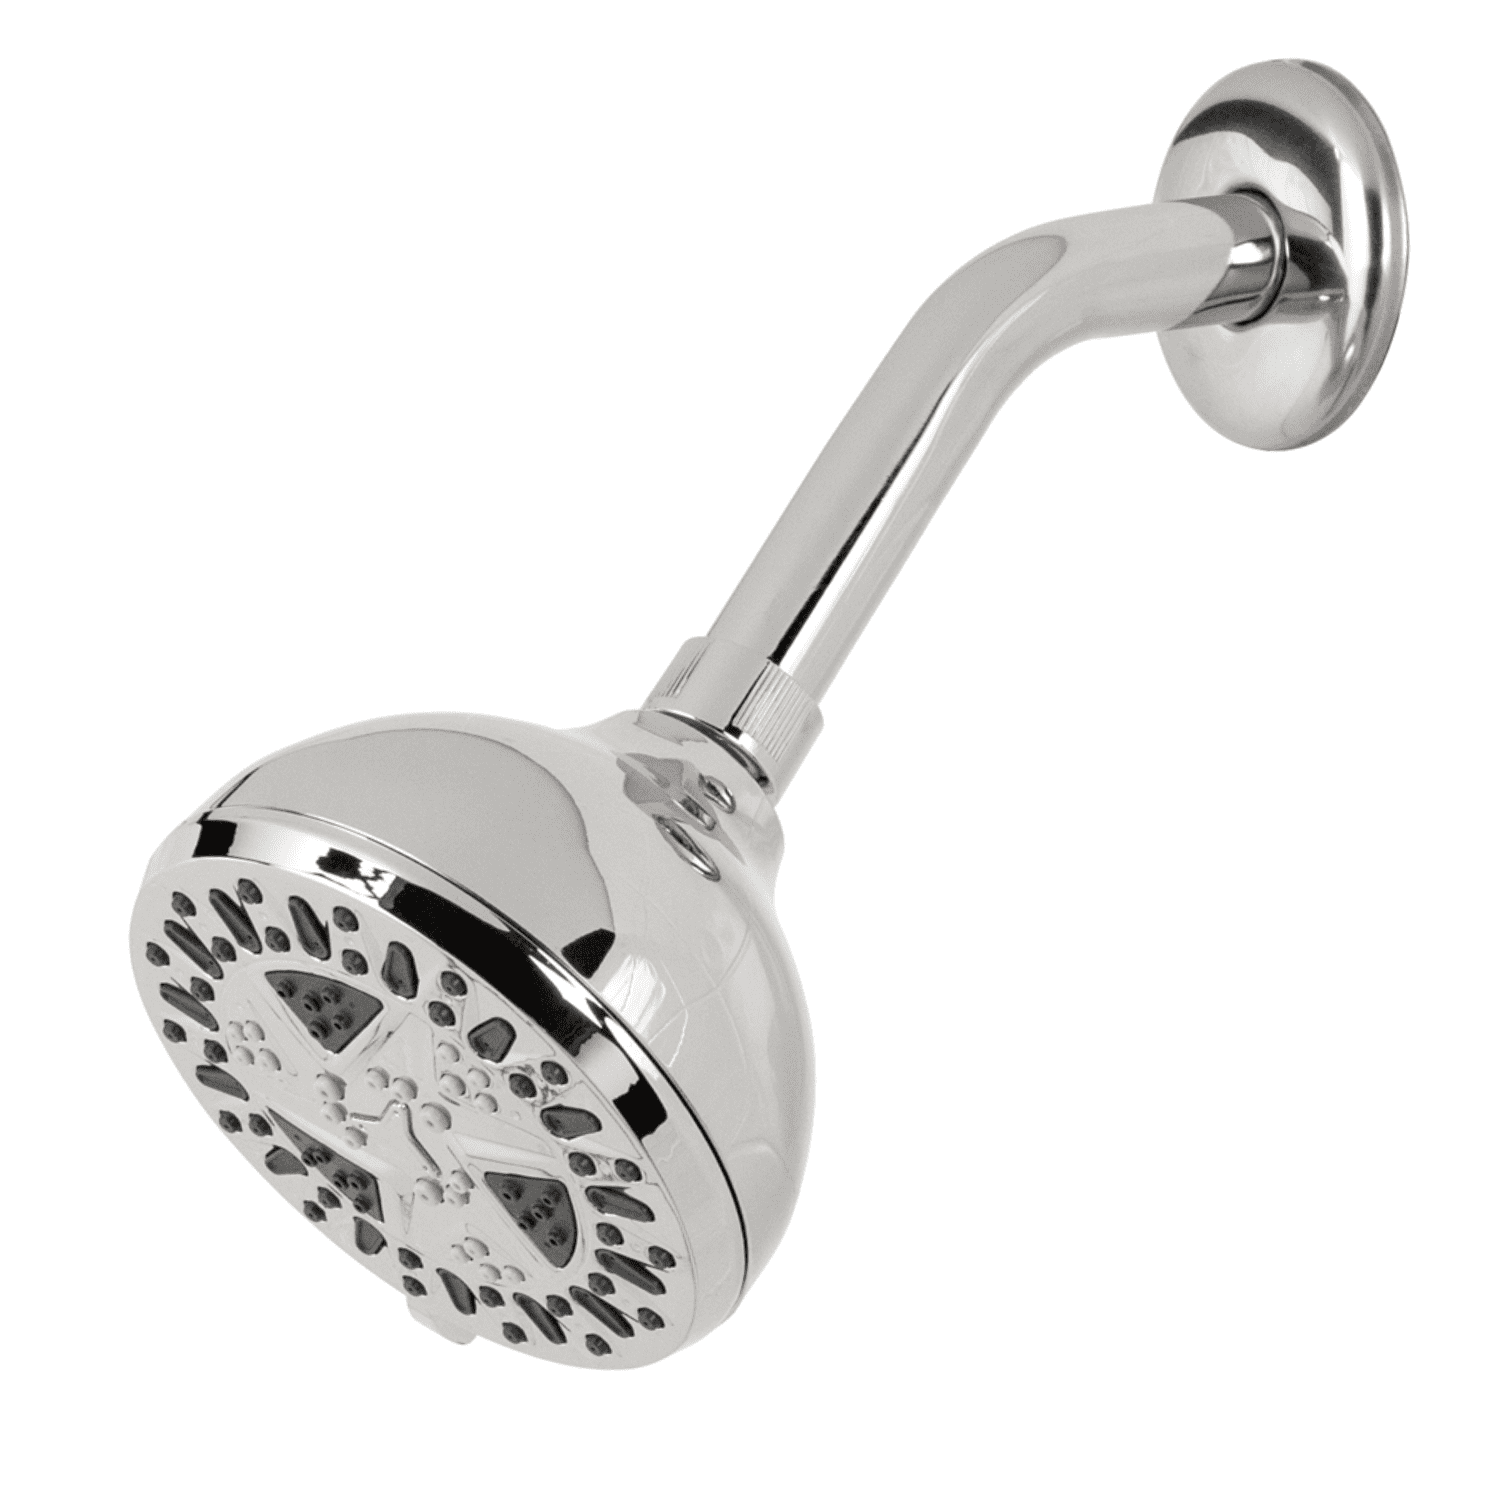 Brass Fixed Shower Head with 7-Spray Settings and Water Sense Certified 4 in 